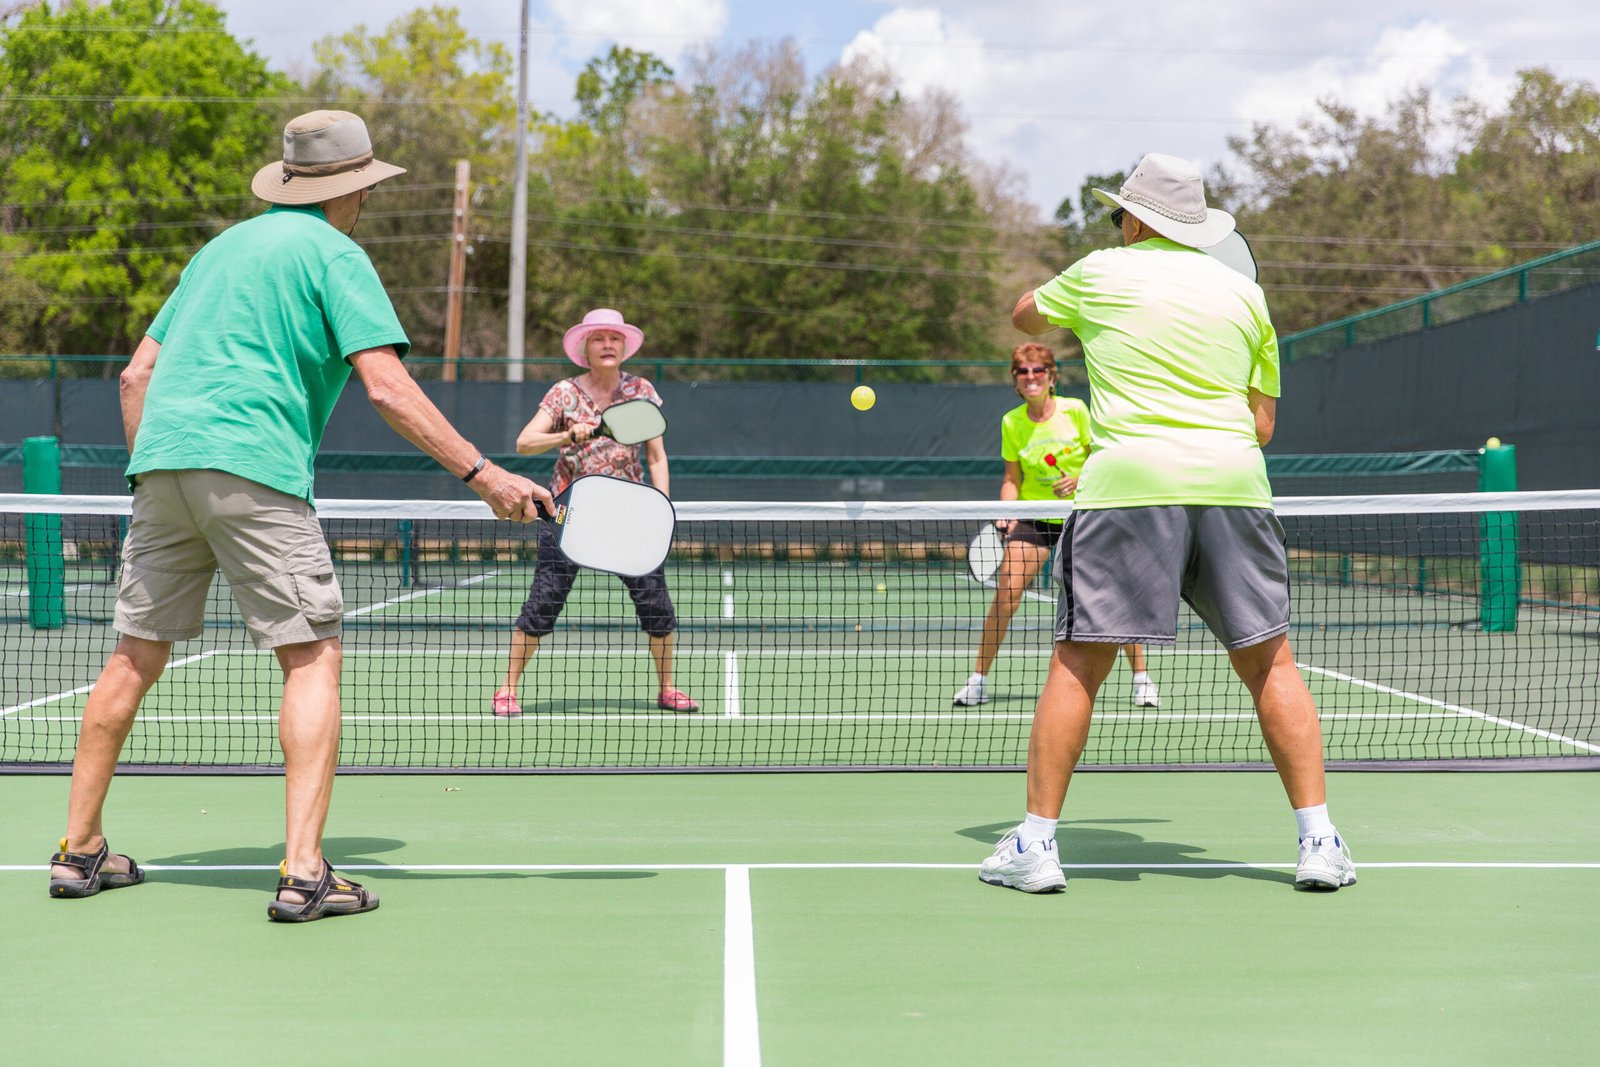 The Most Historic Pickleball Courts: Play Where It All Began